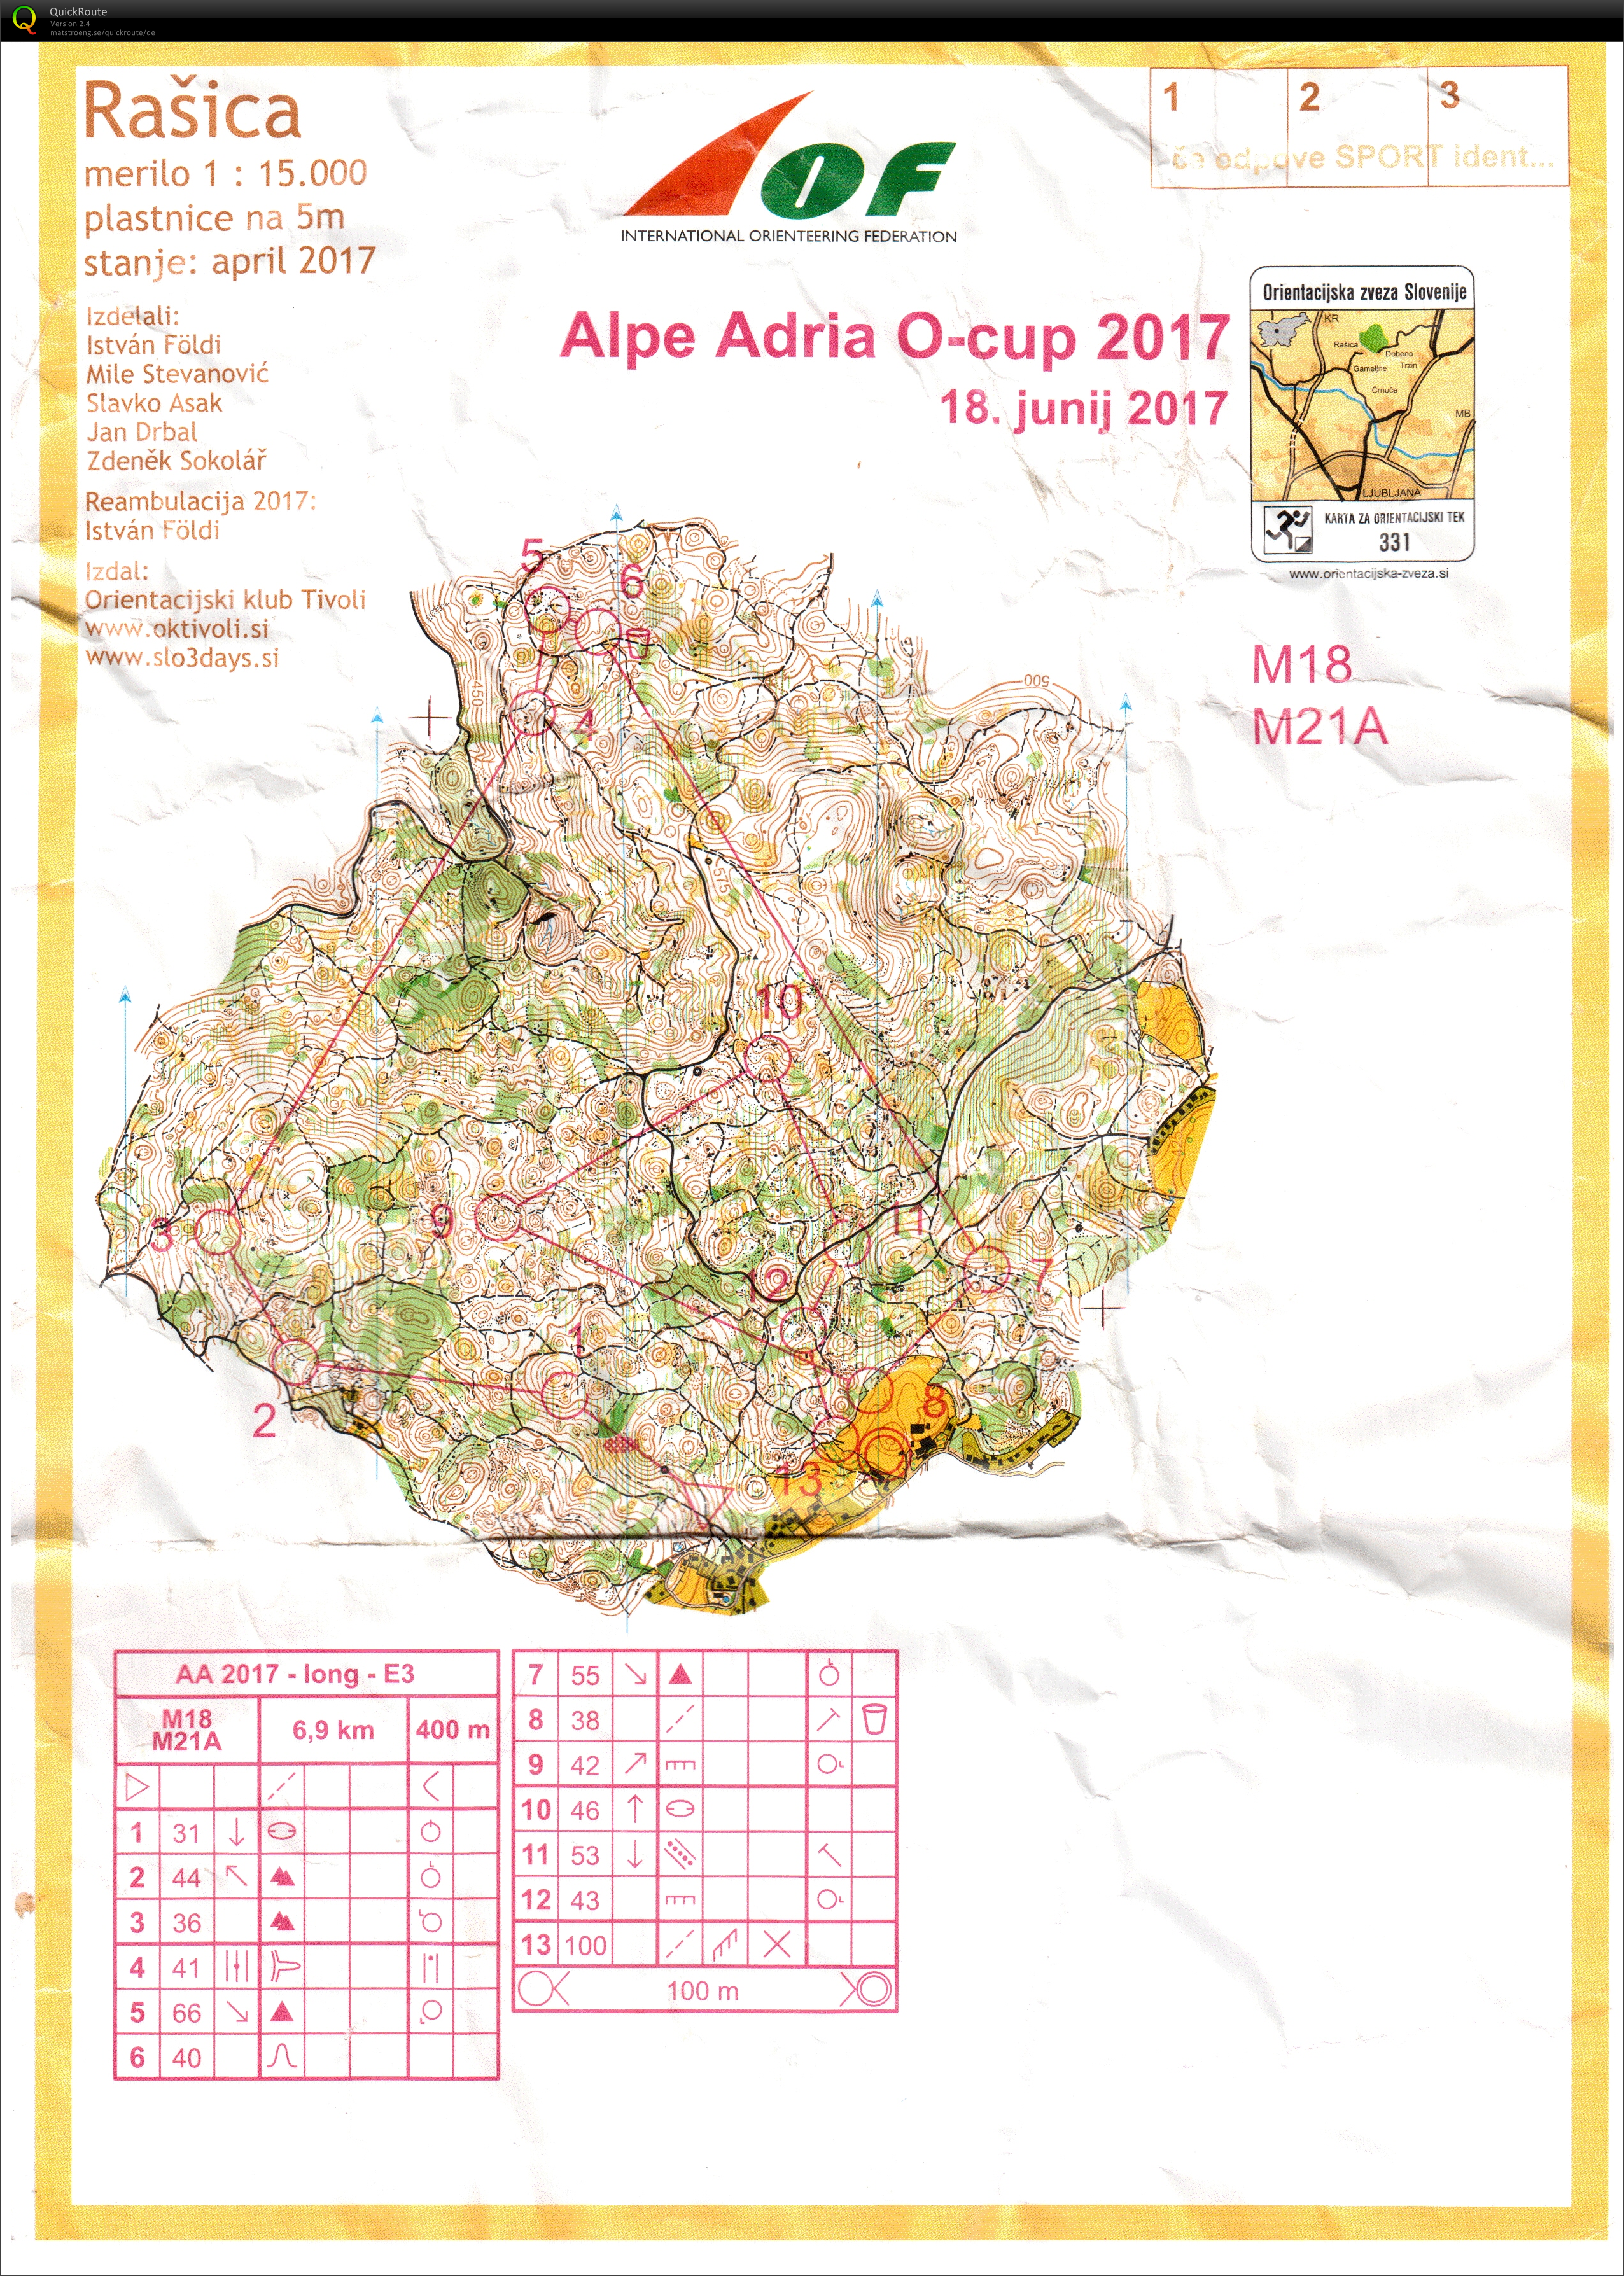 4. Austria Cup and Alpe Adria Cup (18.06.2017)